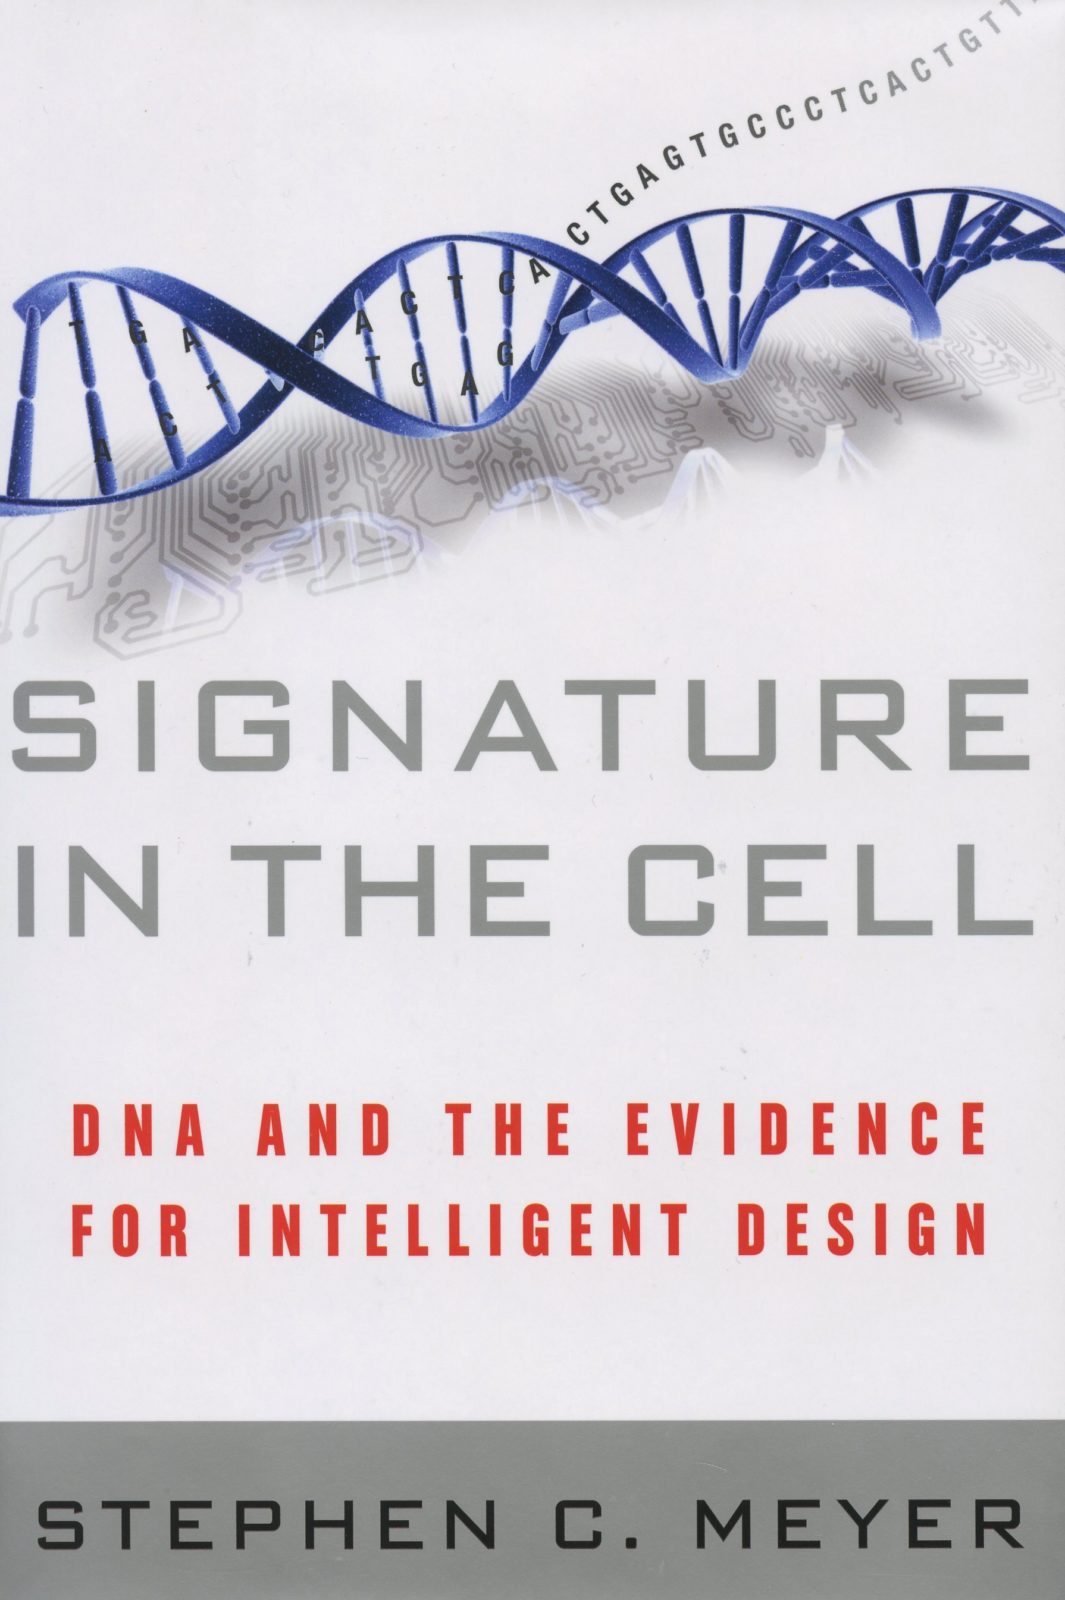 Book cover of Signature in the Cell by Stephen C. Meyer